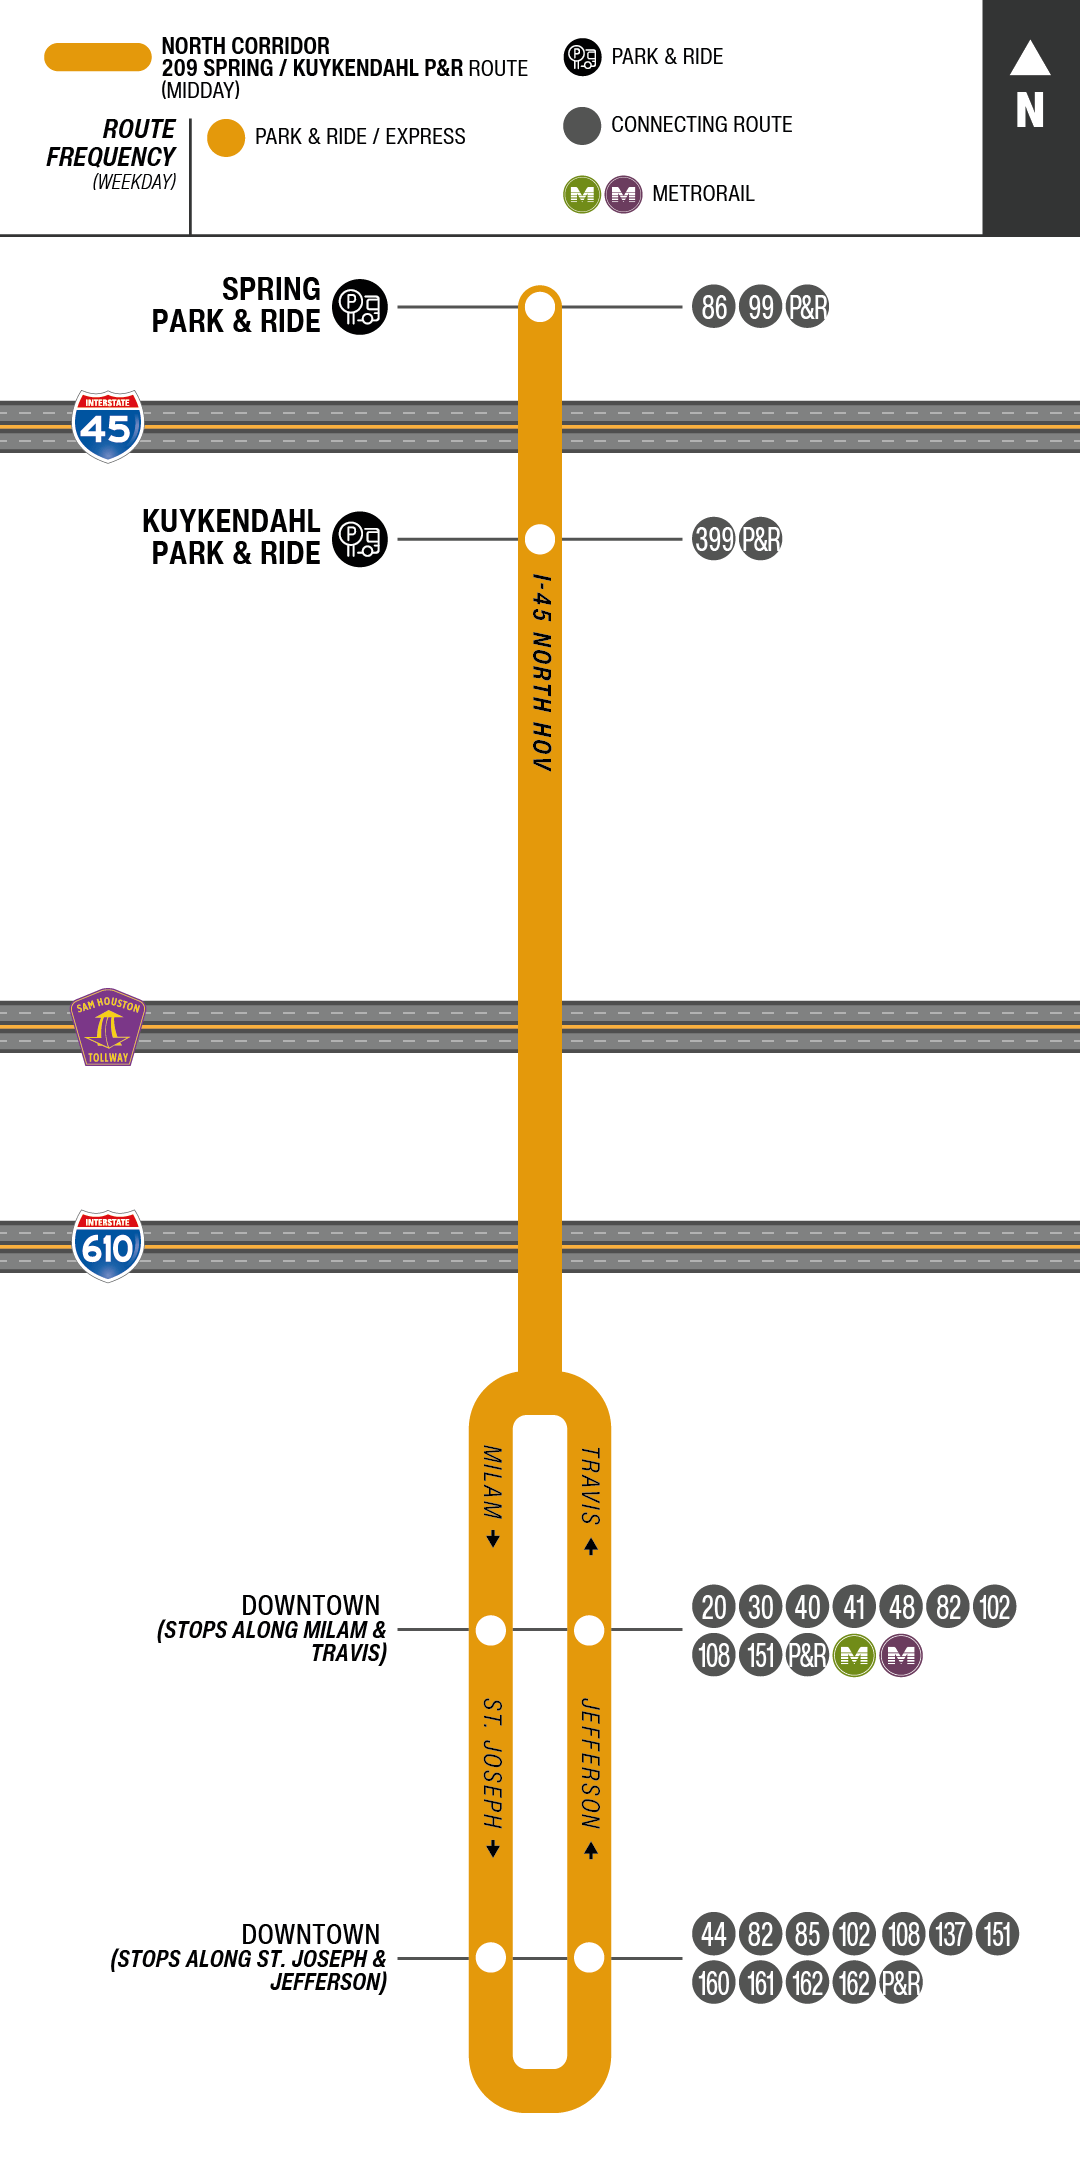 Route map for 209 Spring / Kuykendahl Park & Ride bus